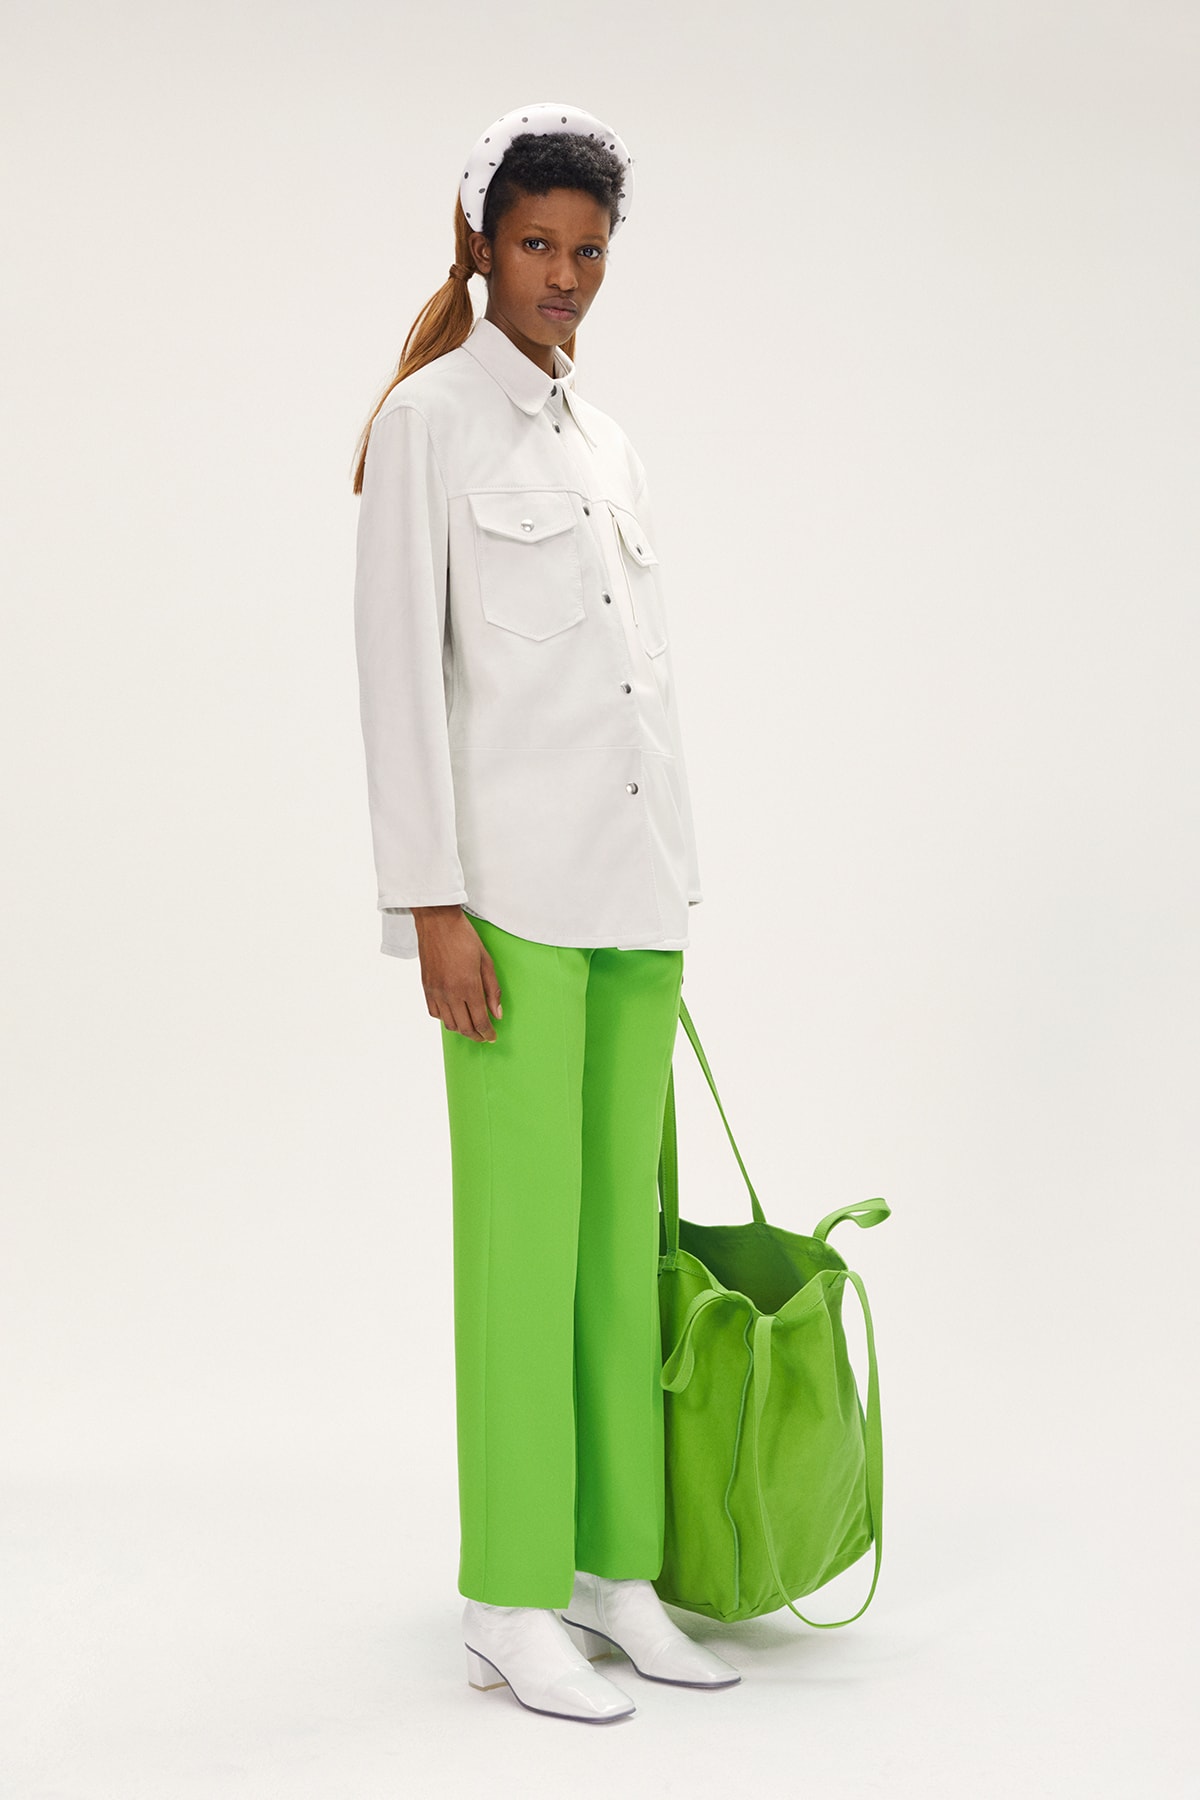 MM6 Maison Margiela Spring/Summer 2020 Collection Lookbook Button Down White Green Pants